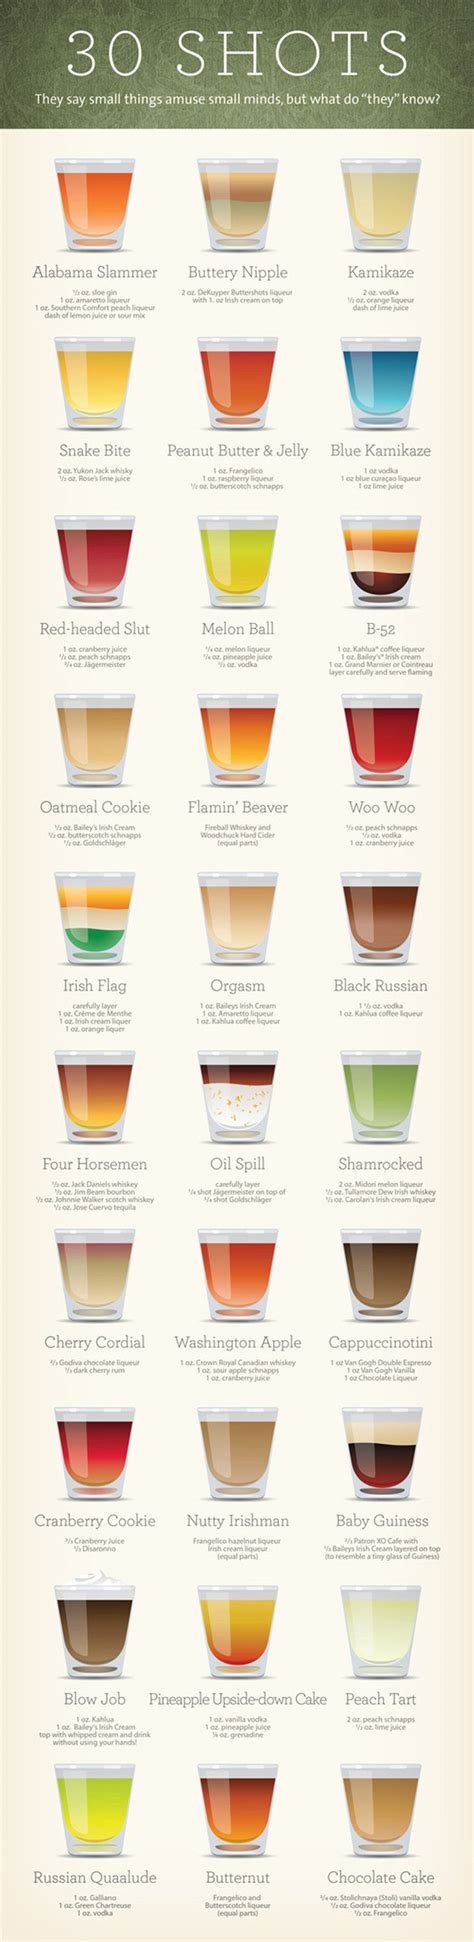 30 Yummy Shot Recipes Everyone Should Try In Their Lifetime